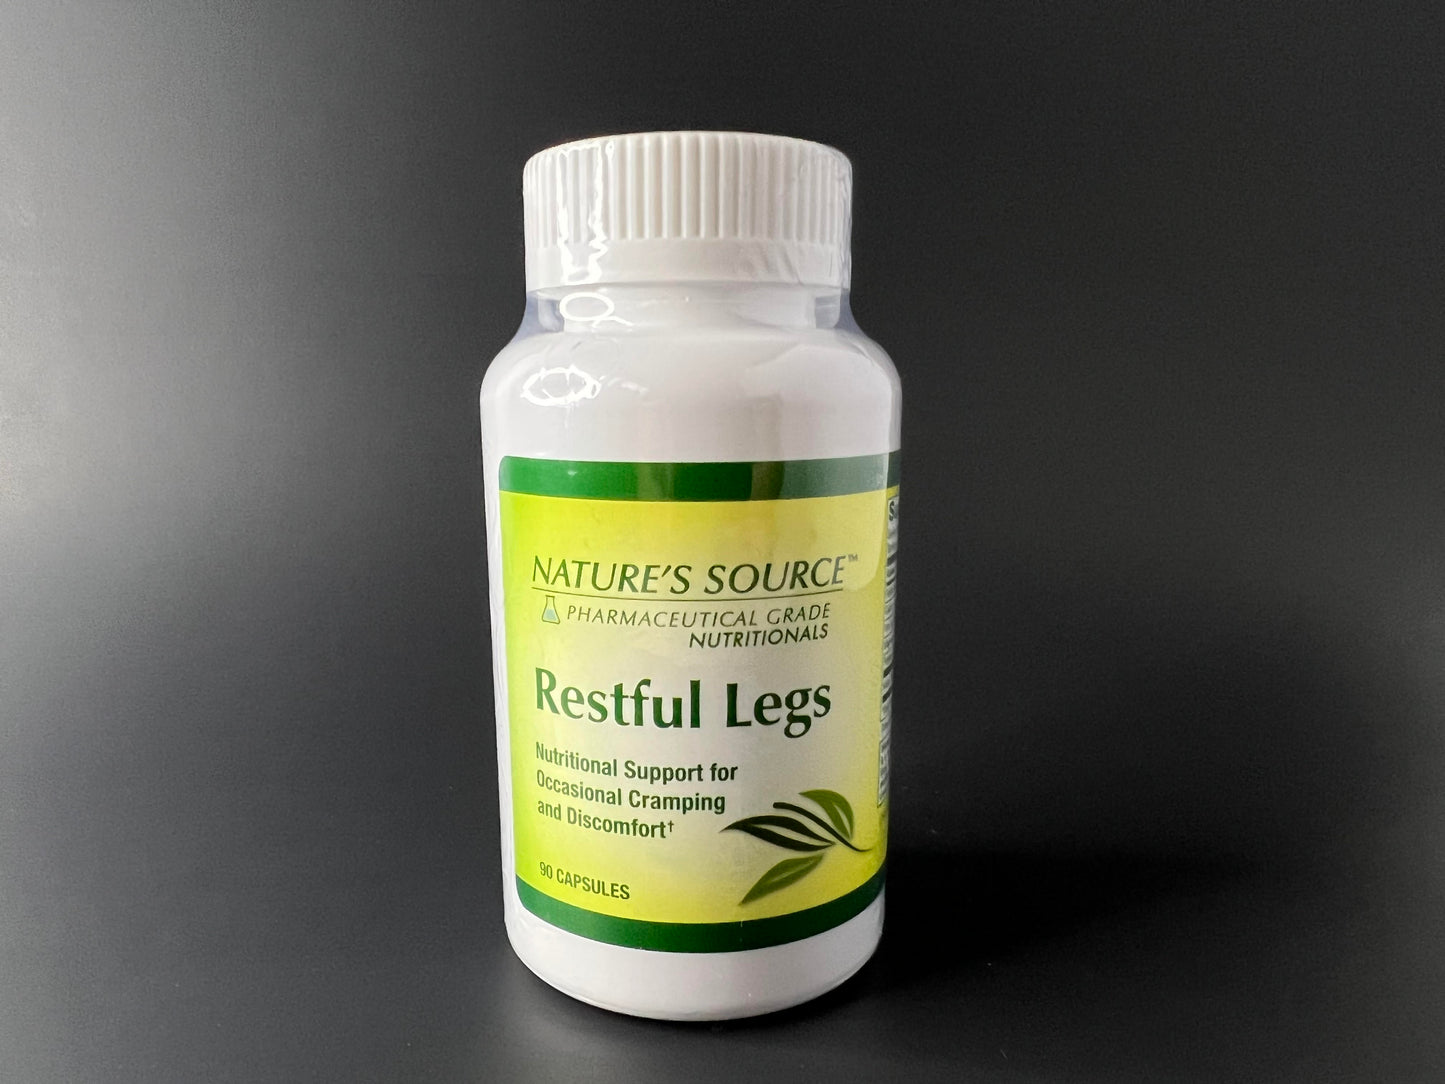 Restful Legs (90 Capsules) by: Nature's Source